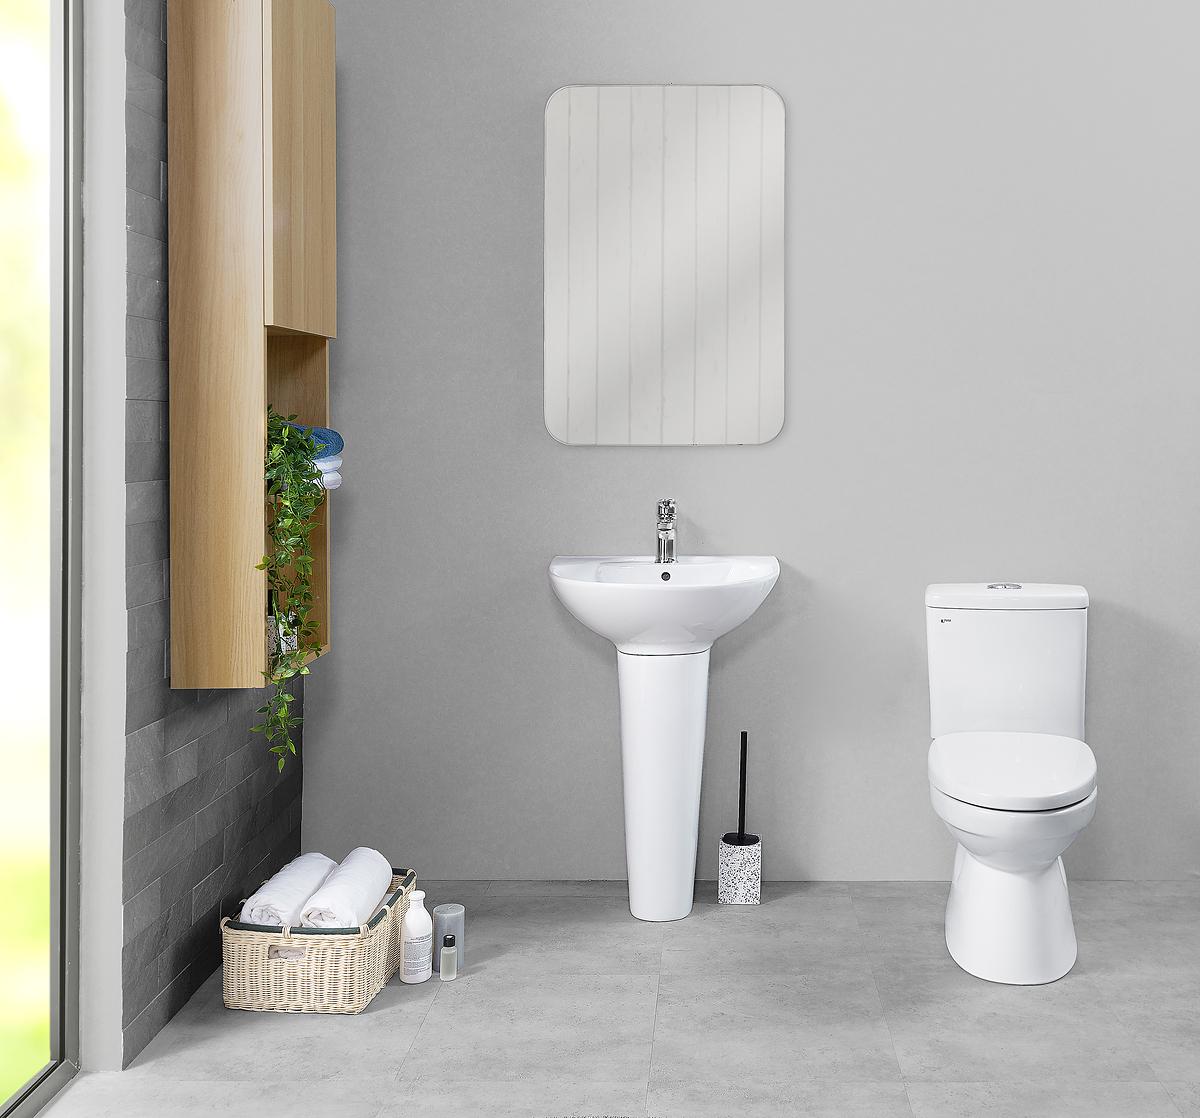 Inax toilet - Maximum water saving support for your family - Photo 1.